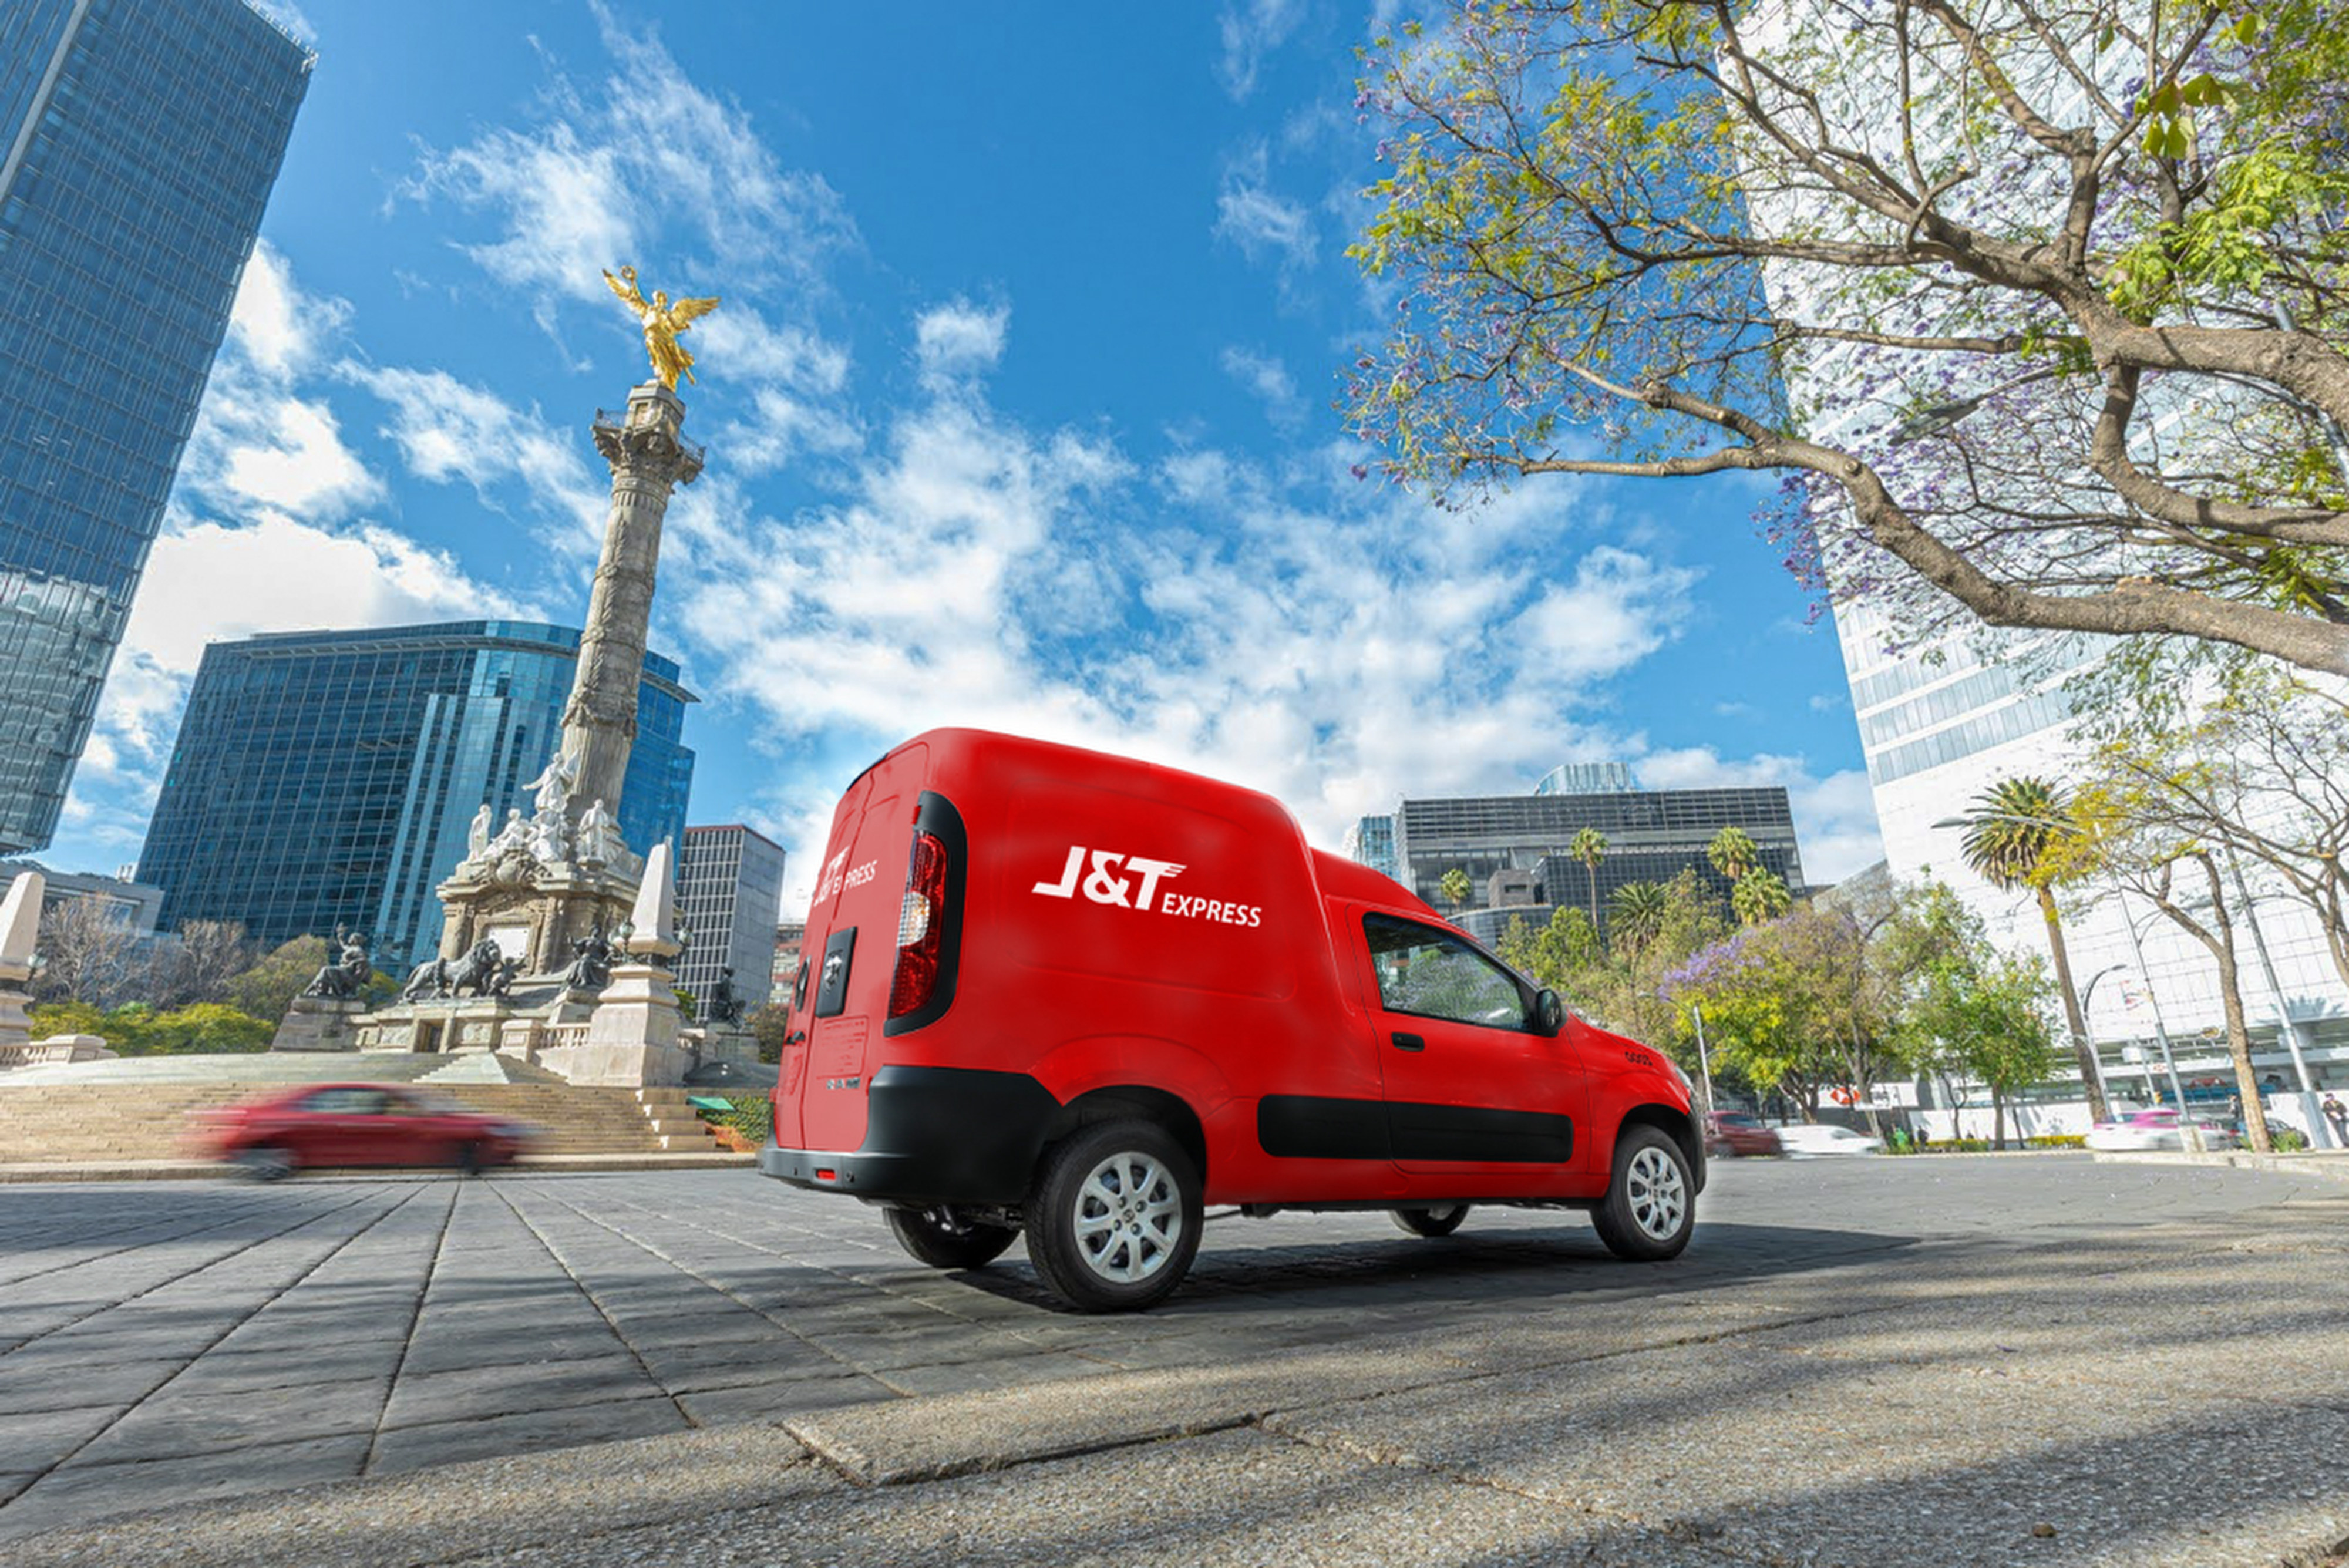 international logistics company J&T Express entered the South American courier market in February 2022, when it started operations in Mexico. Photo: Handout